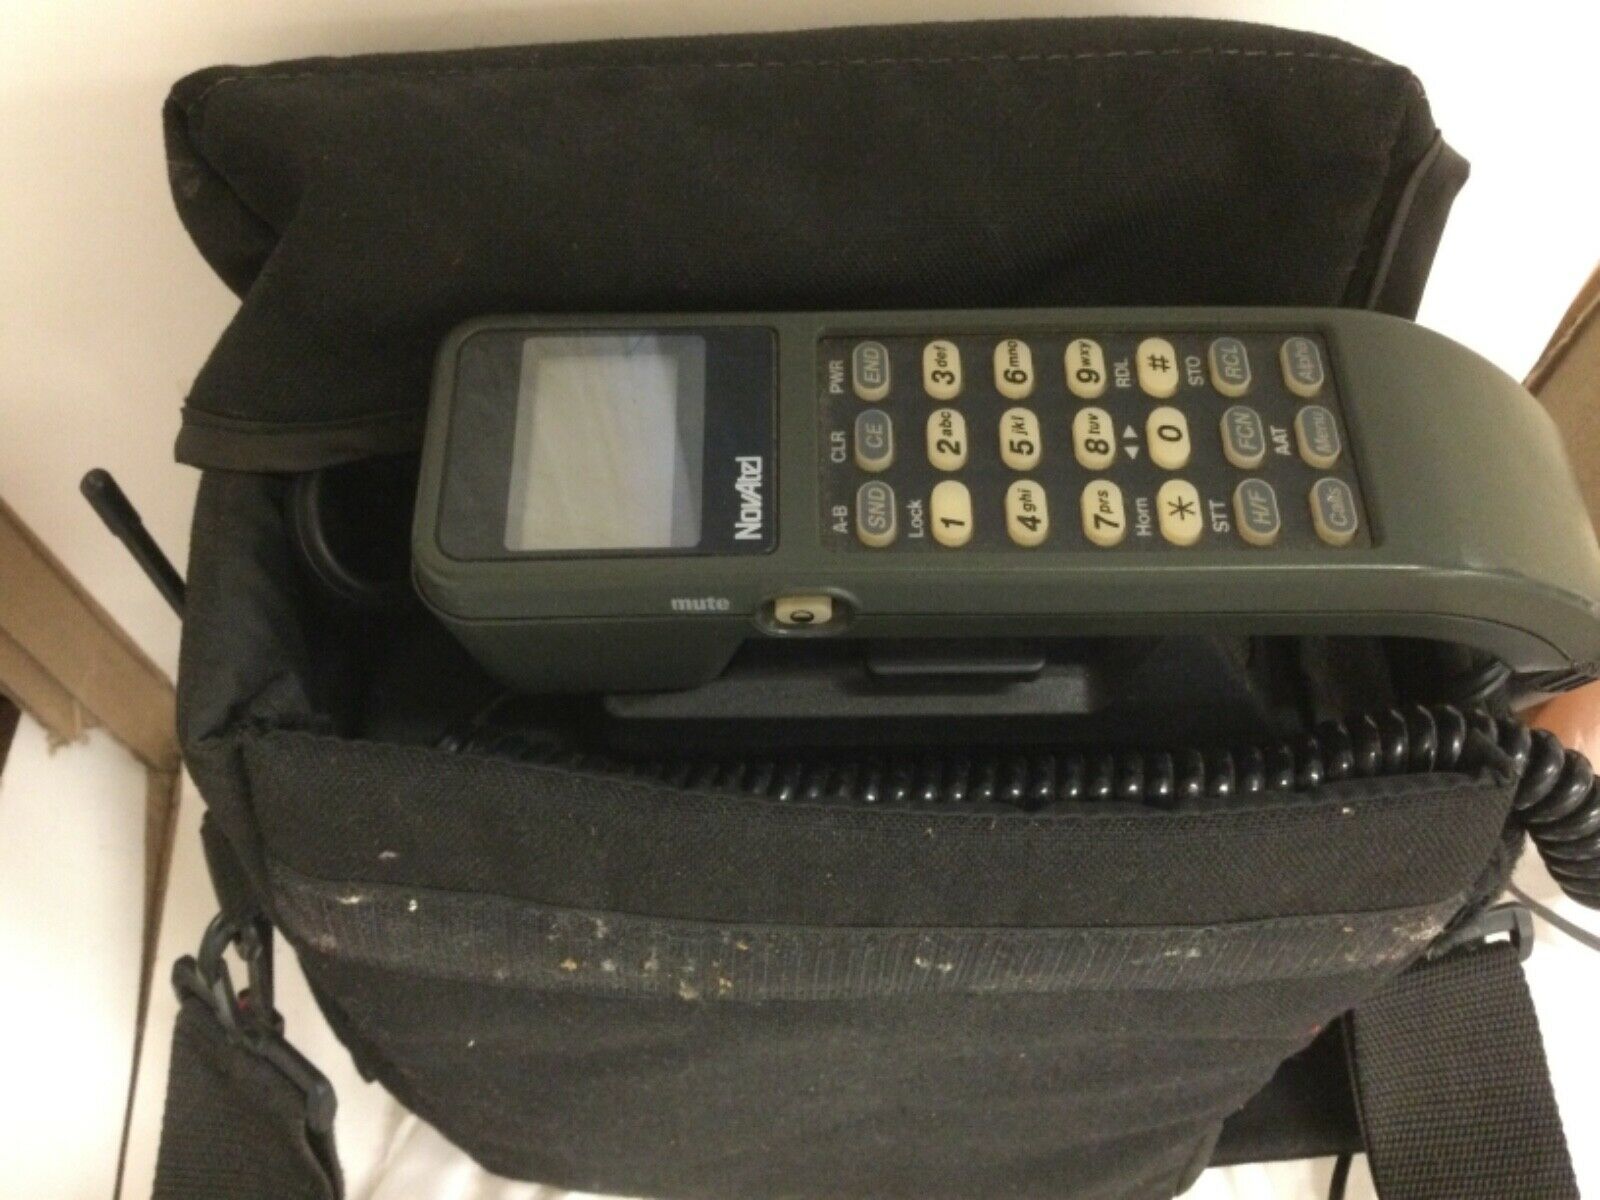 Vintage Novatel Bag Analog Cell Phone Untested, As Is!